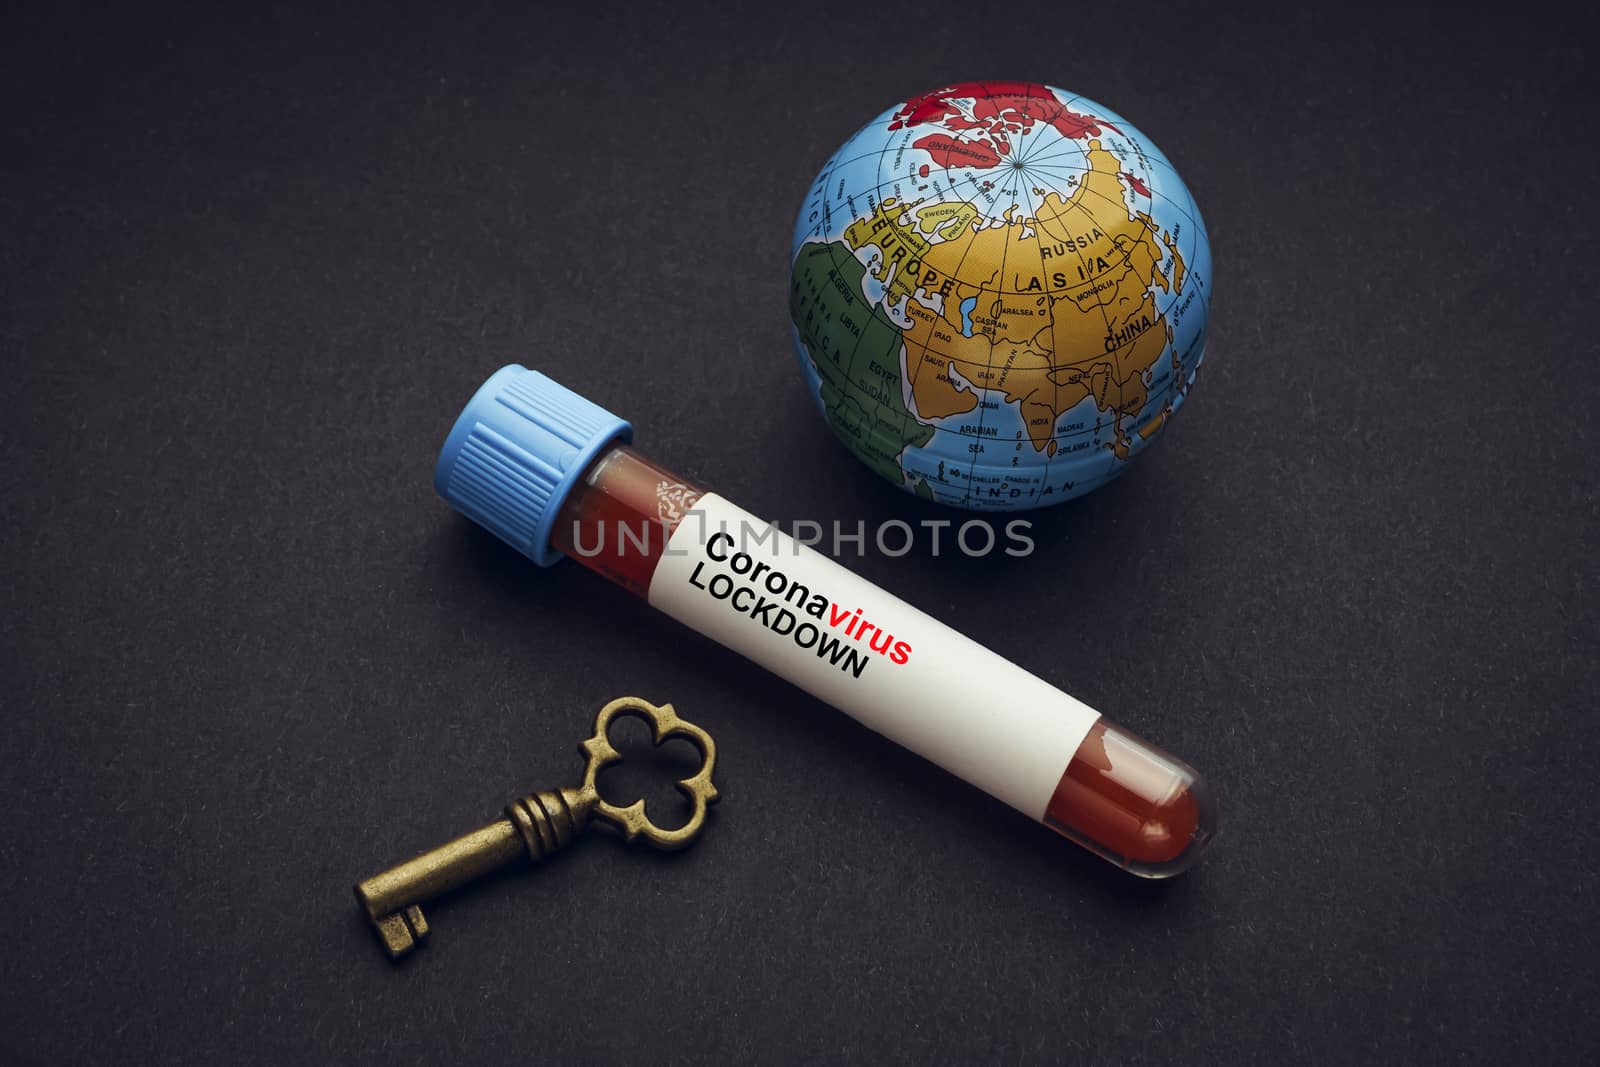 CORONAVIRUS LOCKDOWN text with world globe, key and Blood test vacuum tube on black background by silverwings